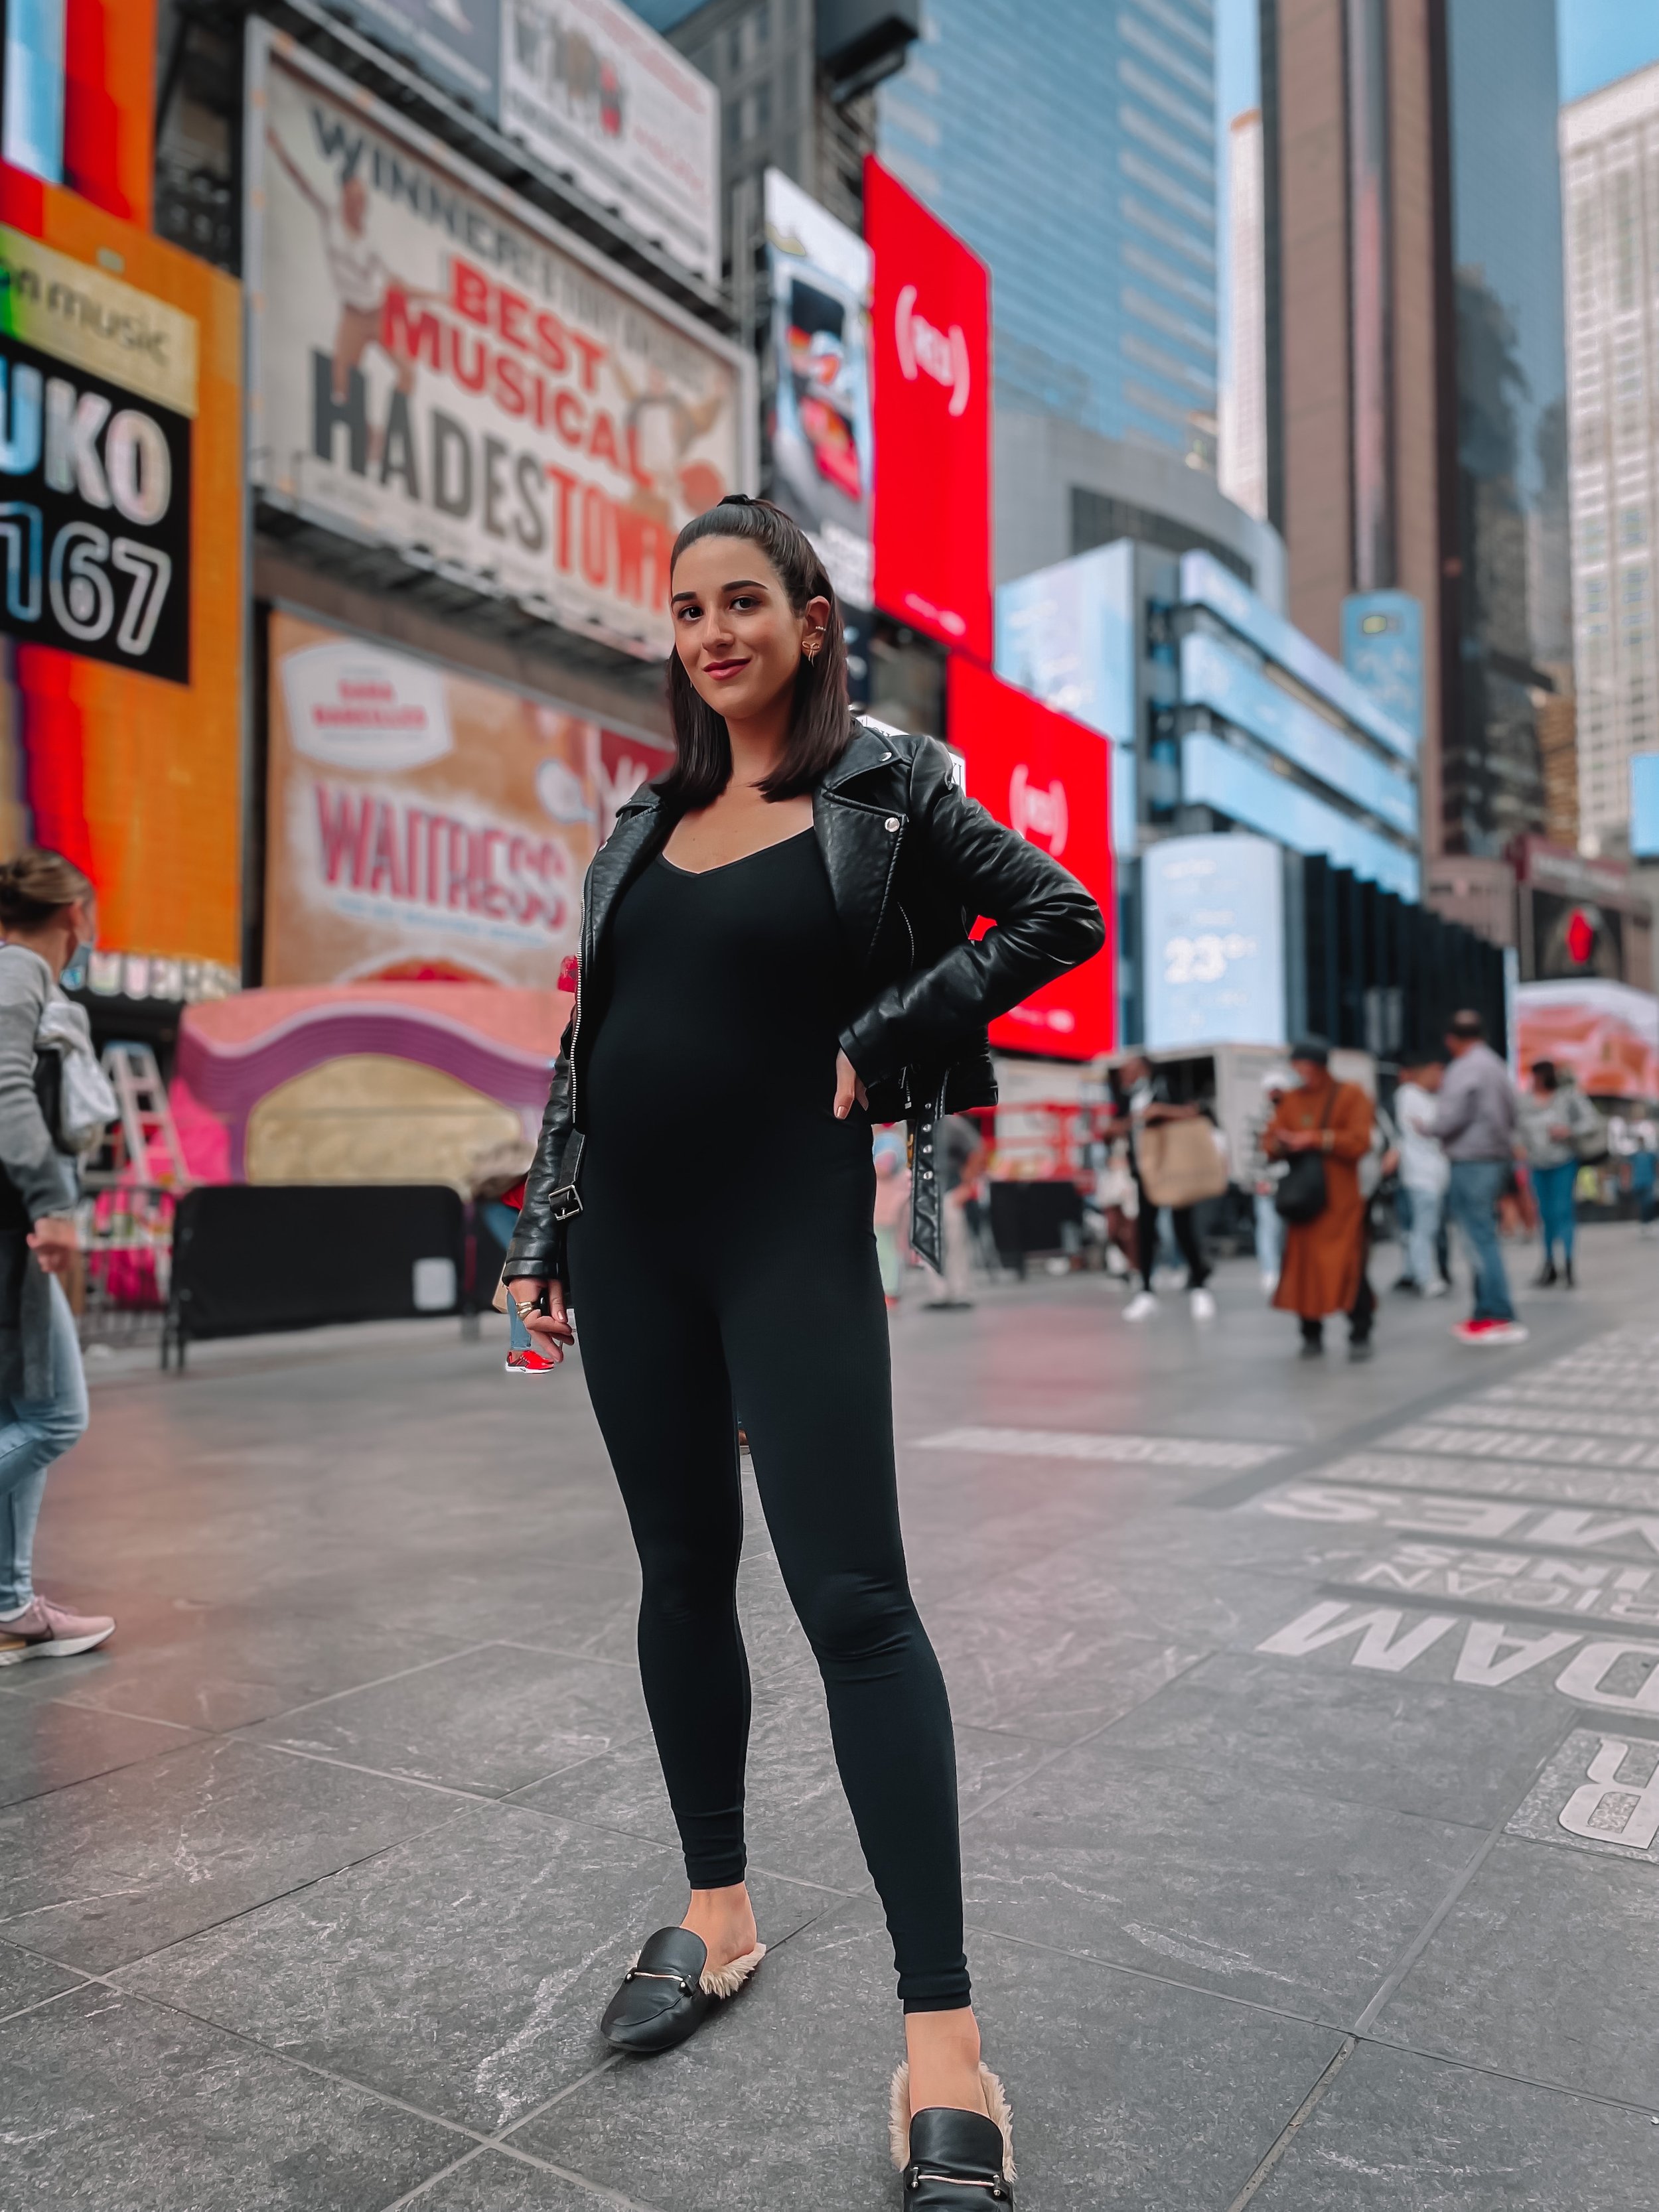 Ribbed Black Jumpsuit Leather Jacket Esther Santer NYC Street Style Blogger Pregnancy Style Maternity Fashion Bump Styled Bumpdate Hatch Unitard Target Fur Slides Expecting Mom What To Wear Shopping All Black Outfit OOTD Times Square NYC Tripod Shoot.JPG